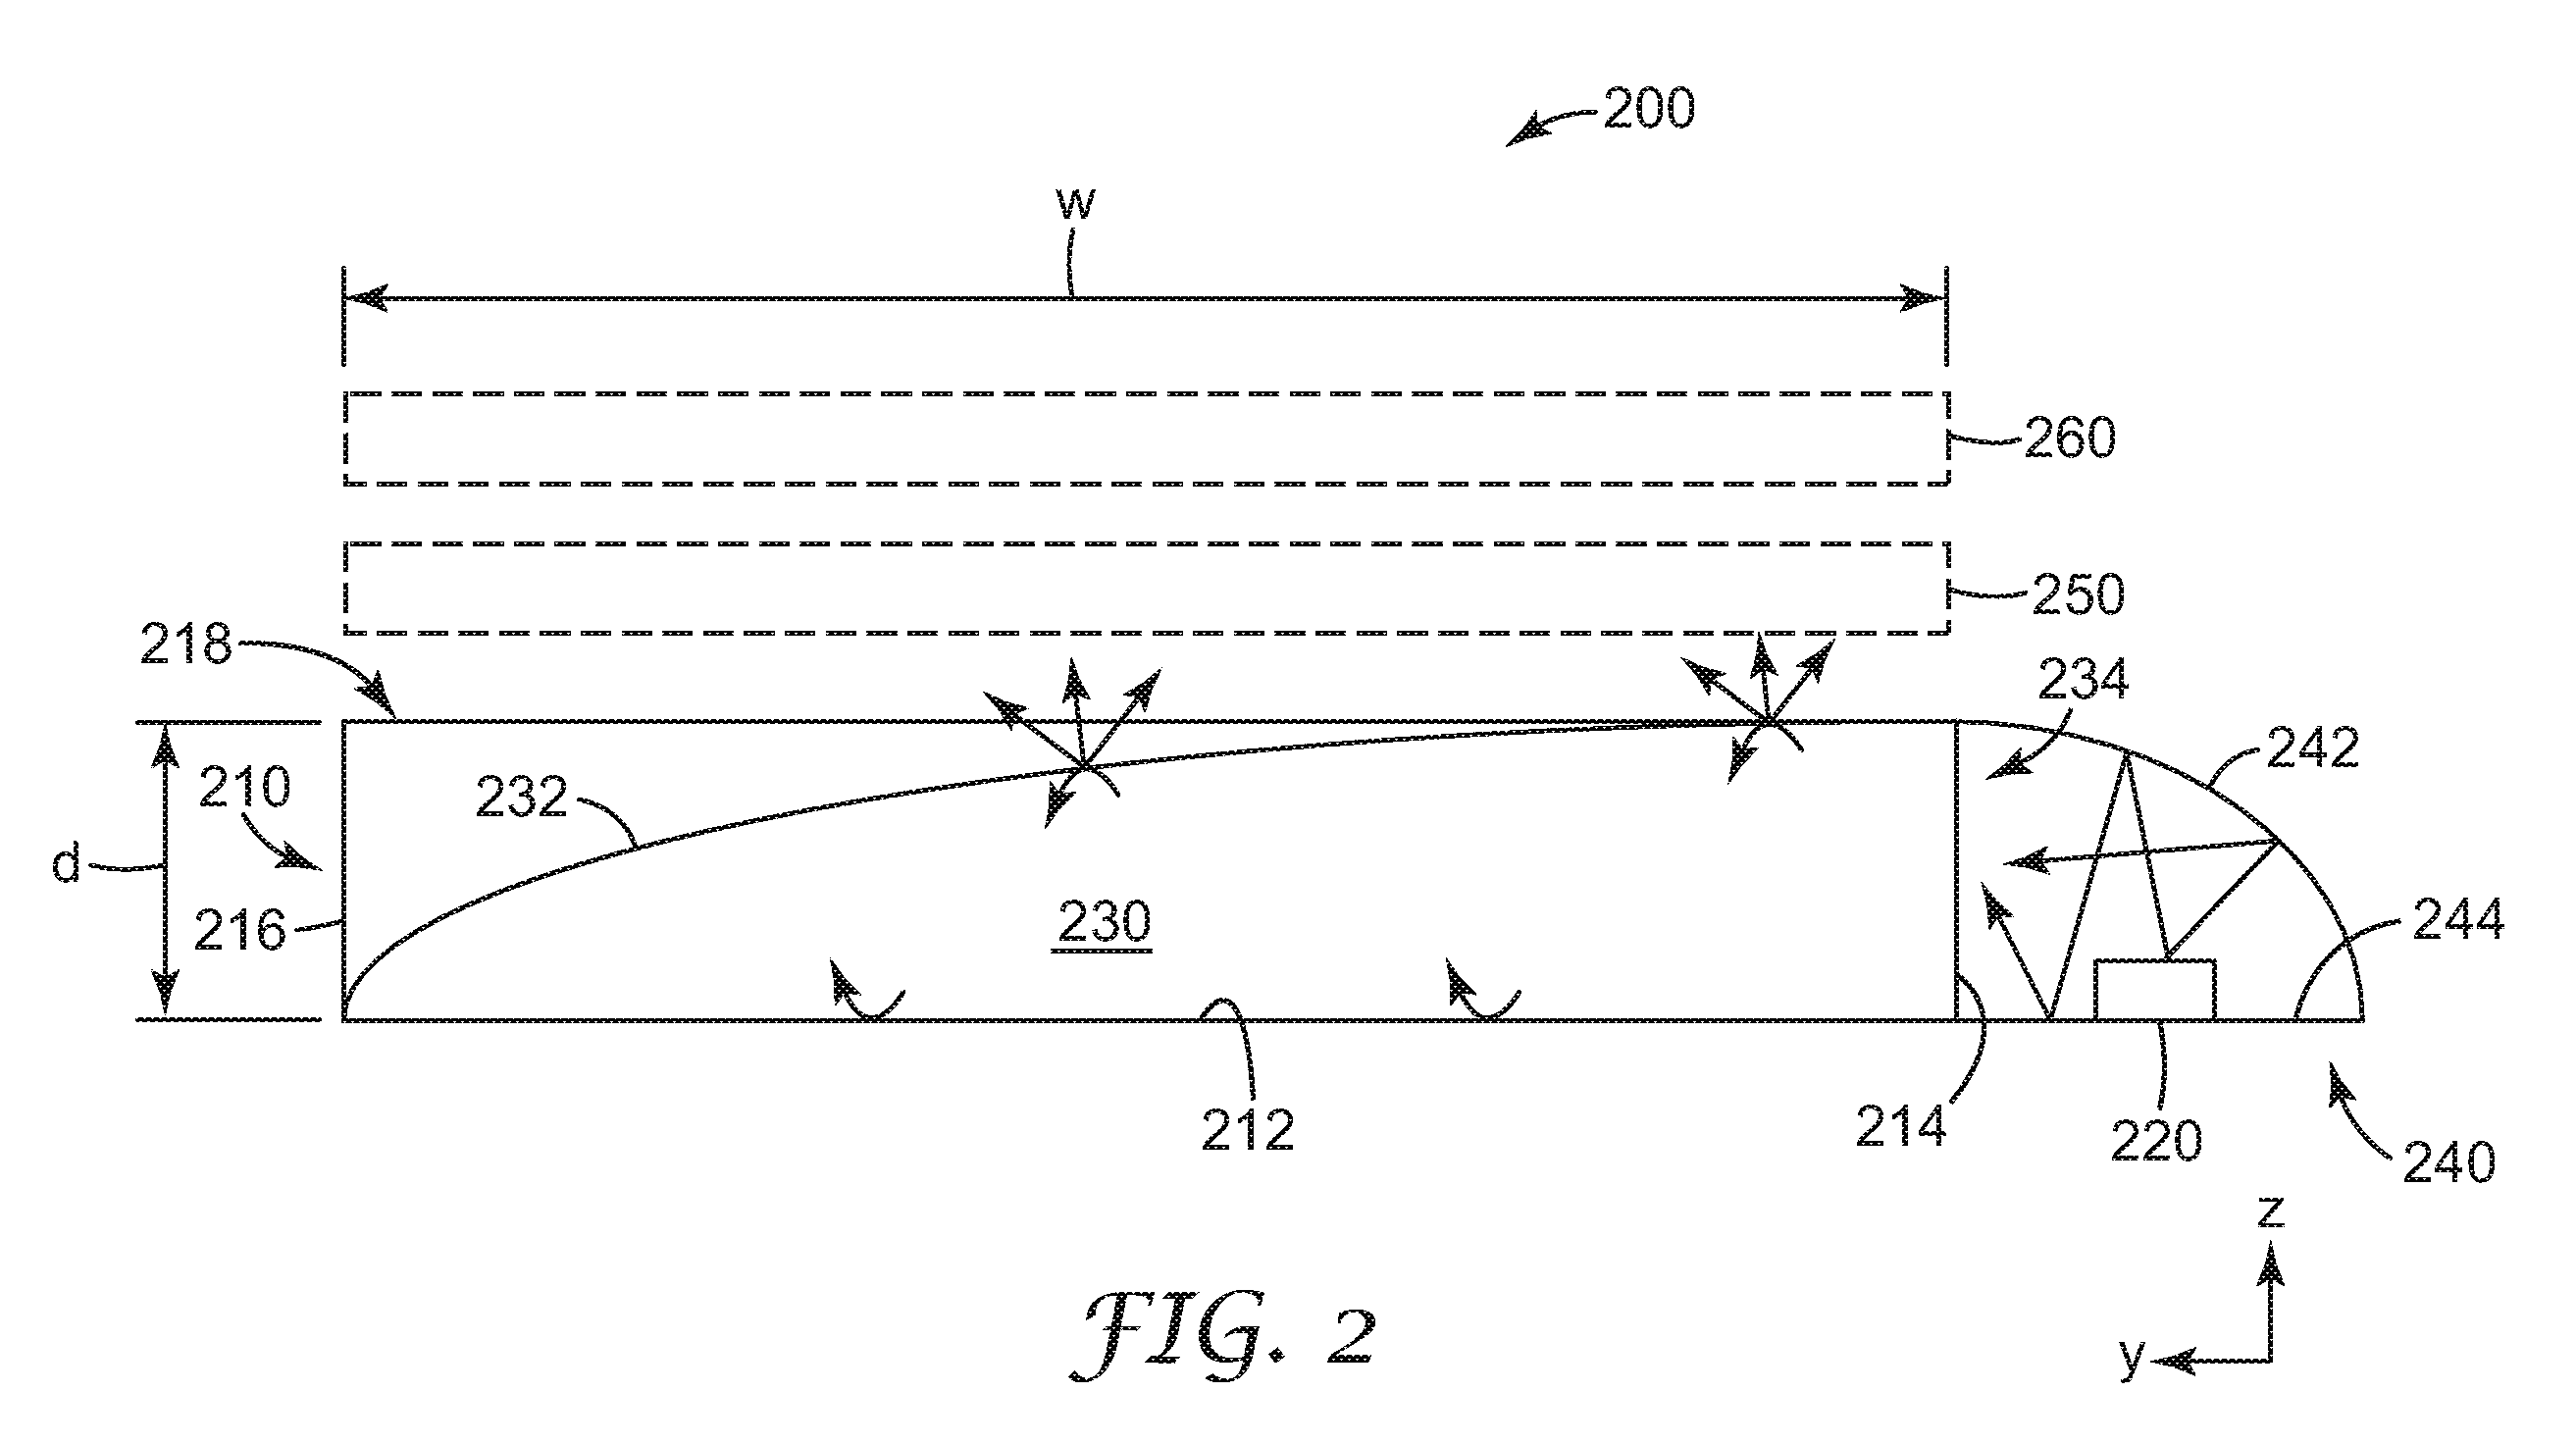 Edge-lit backlight having light recycling cavity with concave transflector